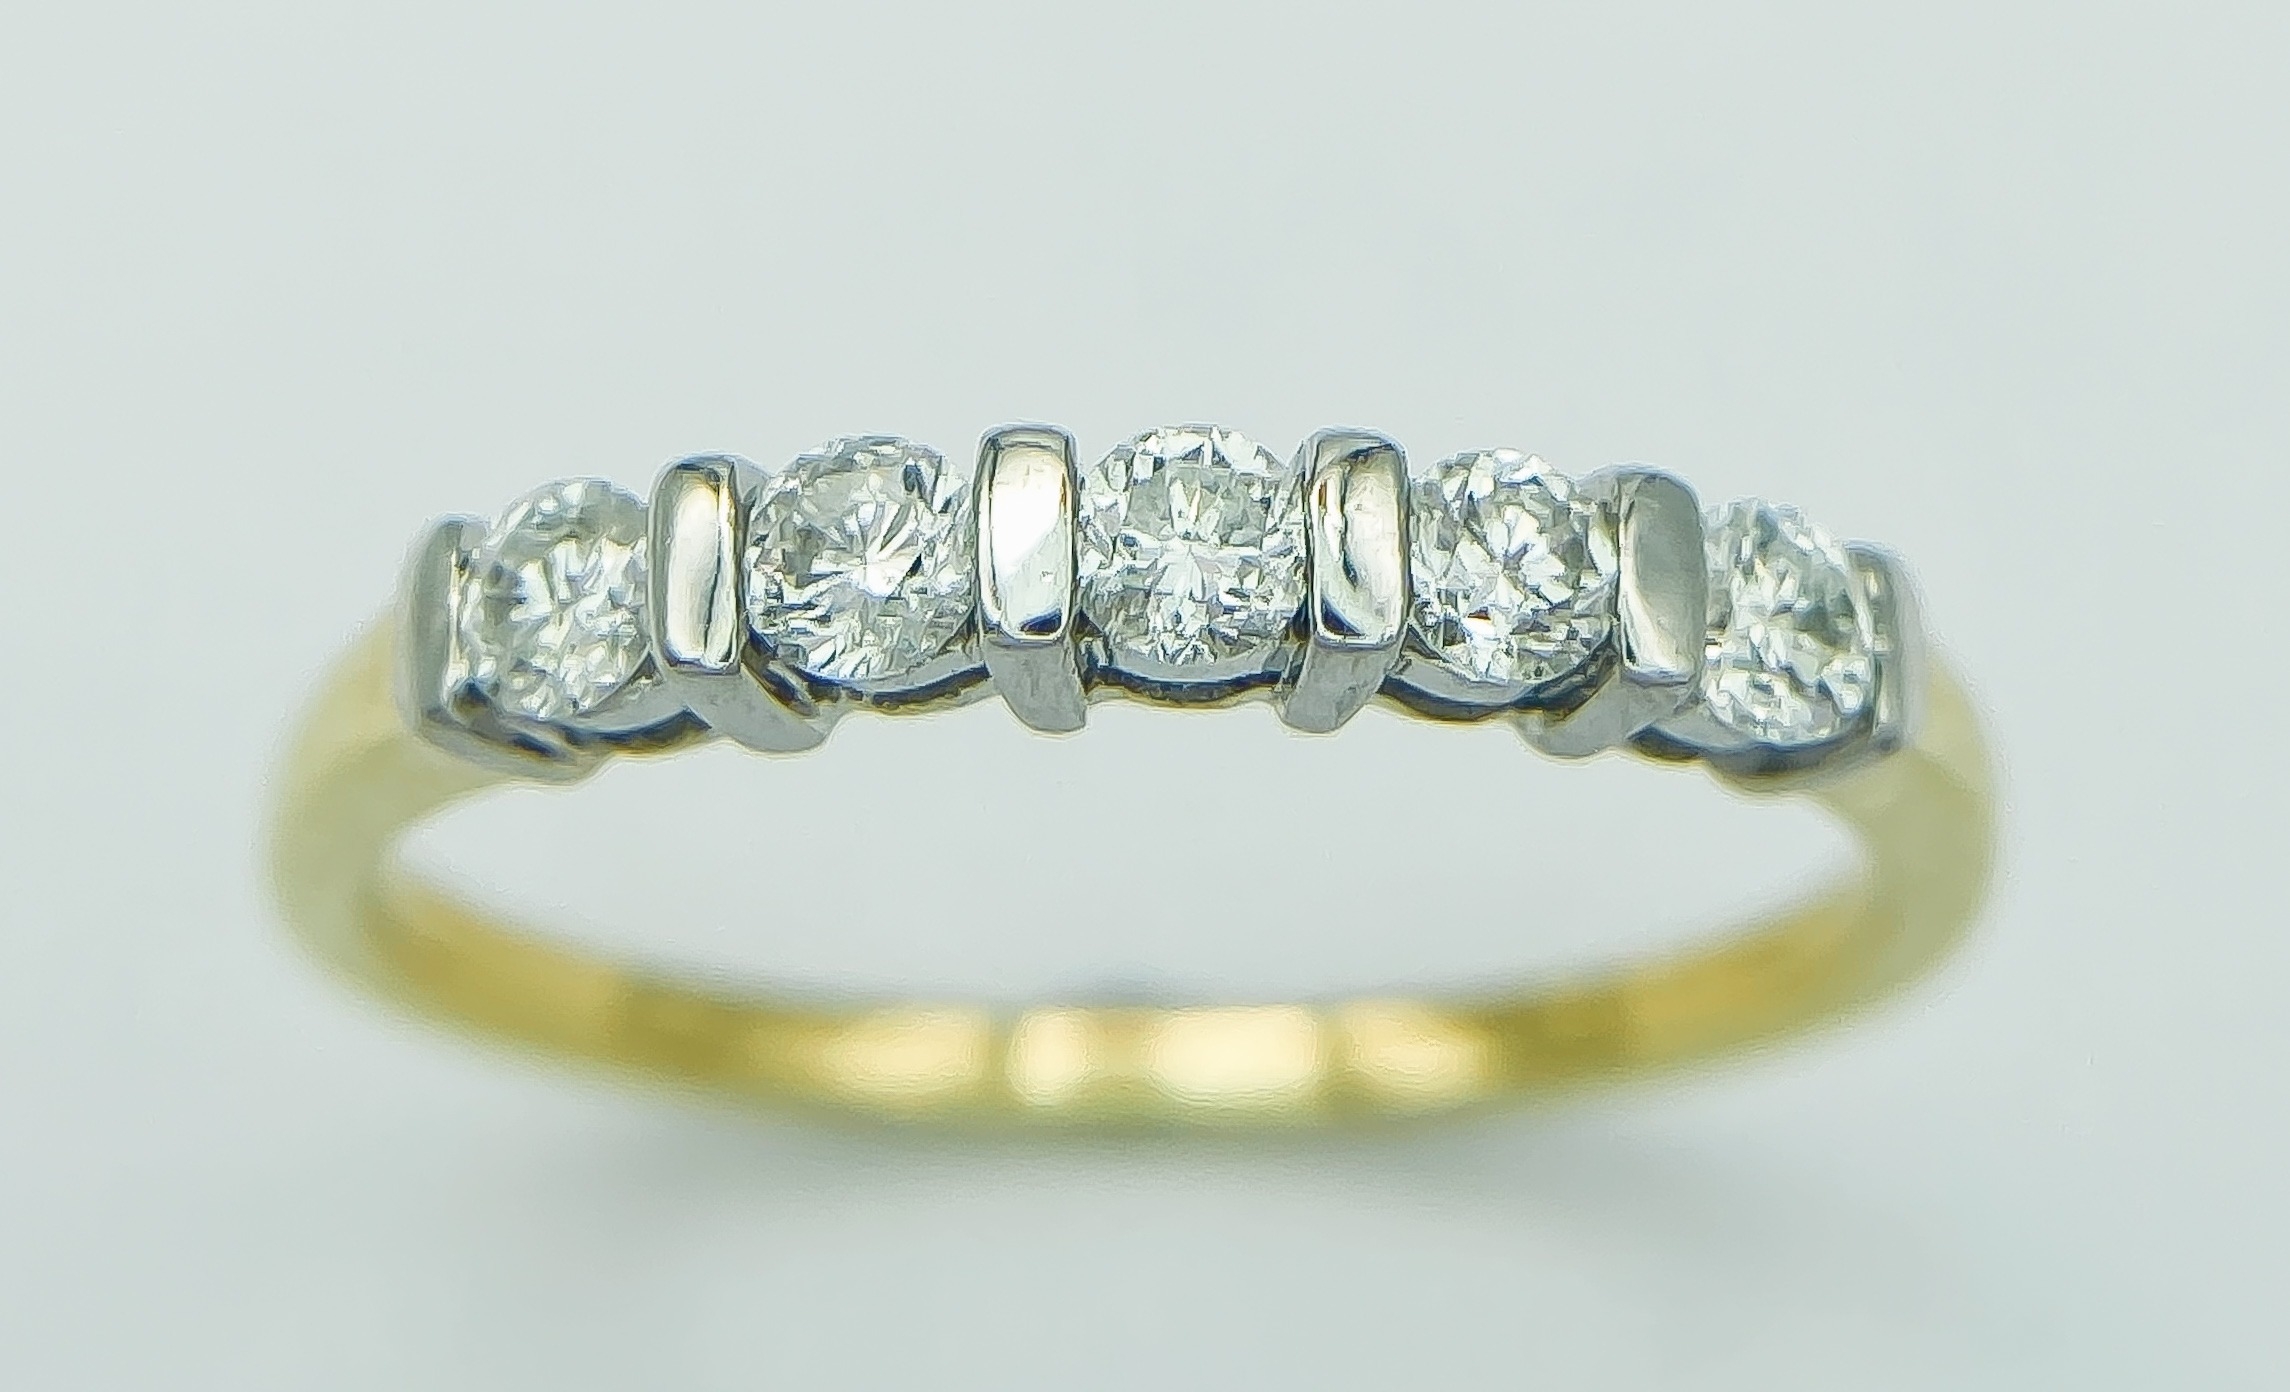 AN 18K YELLOW GOLD AND DIAMOND 5 STONE RING. 0.25CT. 1.8G. SIZE J. - Image 2 of 5